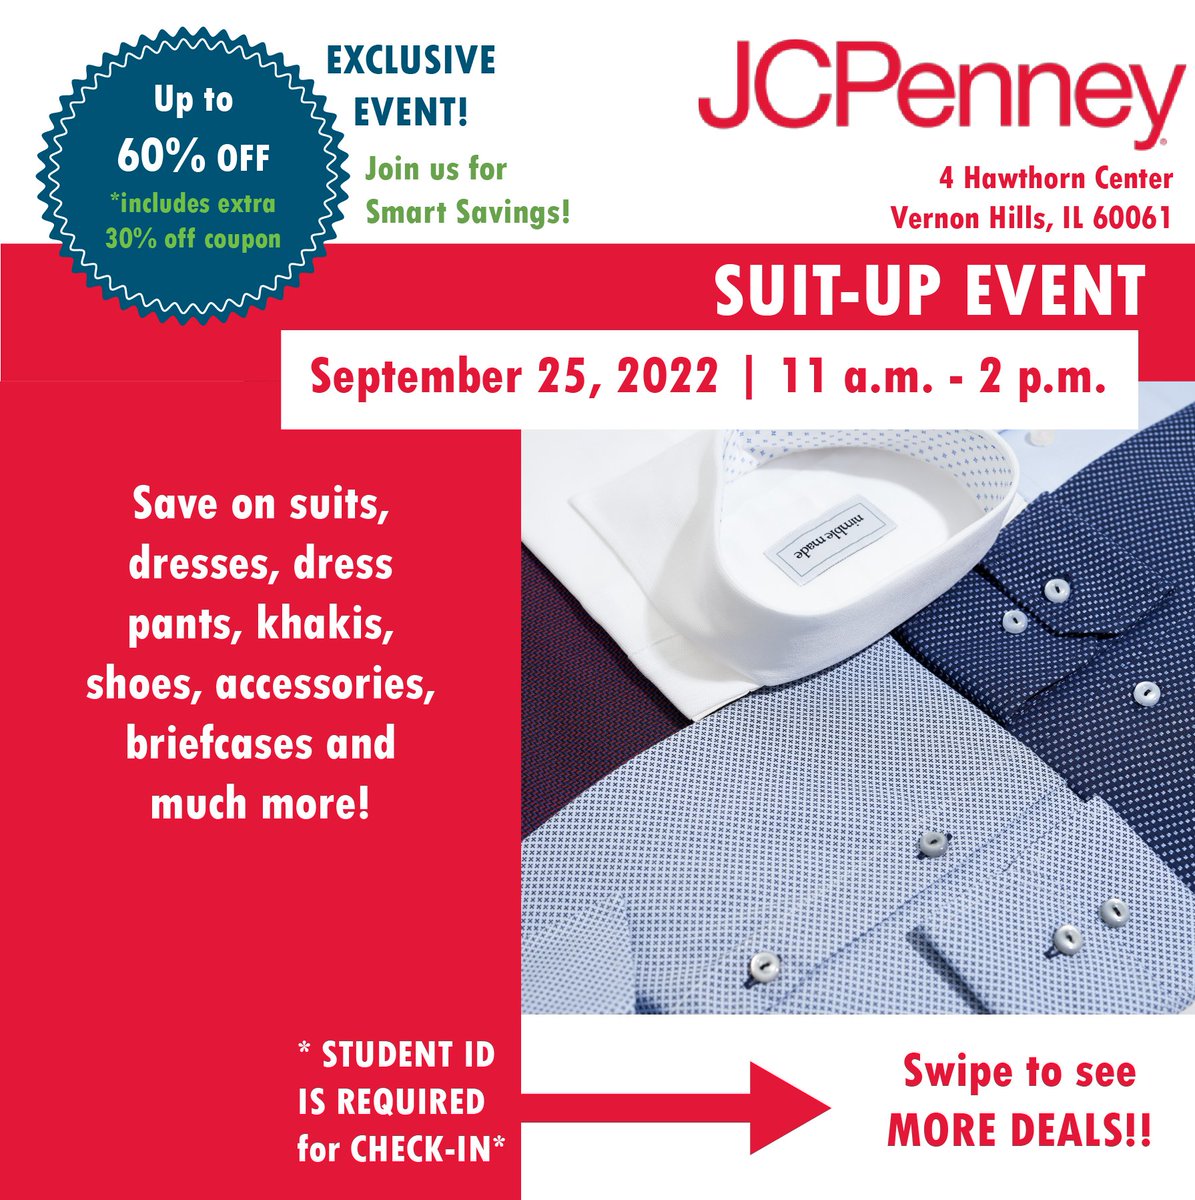 JCPenney Virtual Suit-Up Event  Illinois Institute of Technology